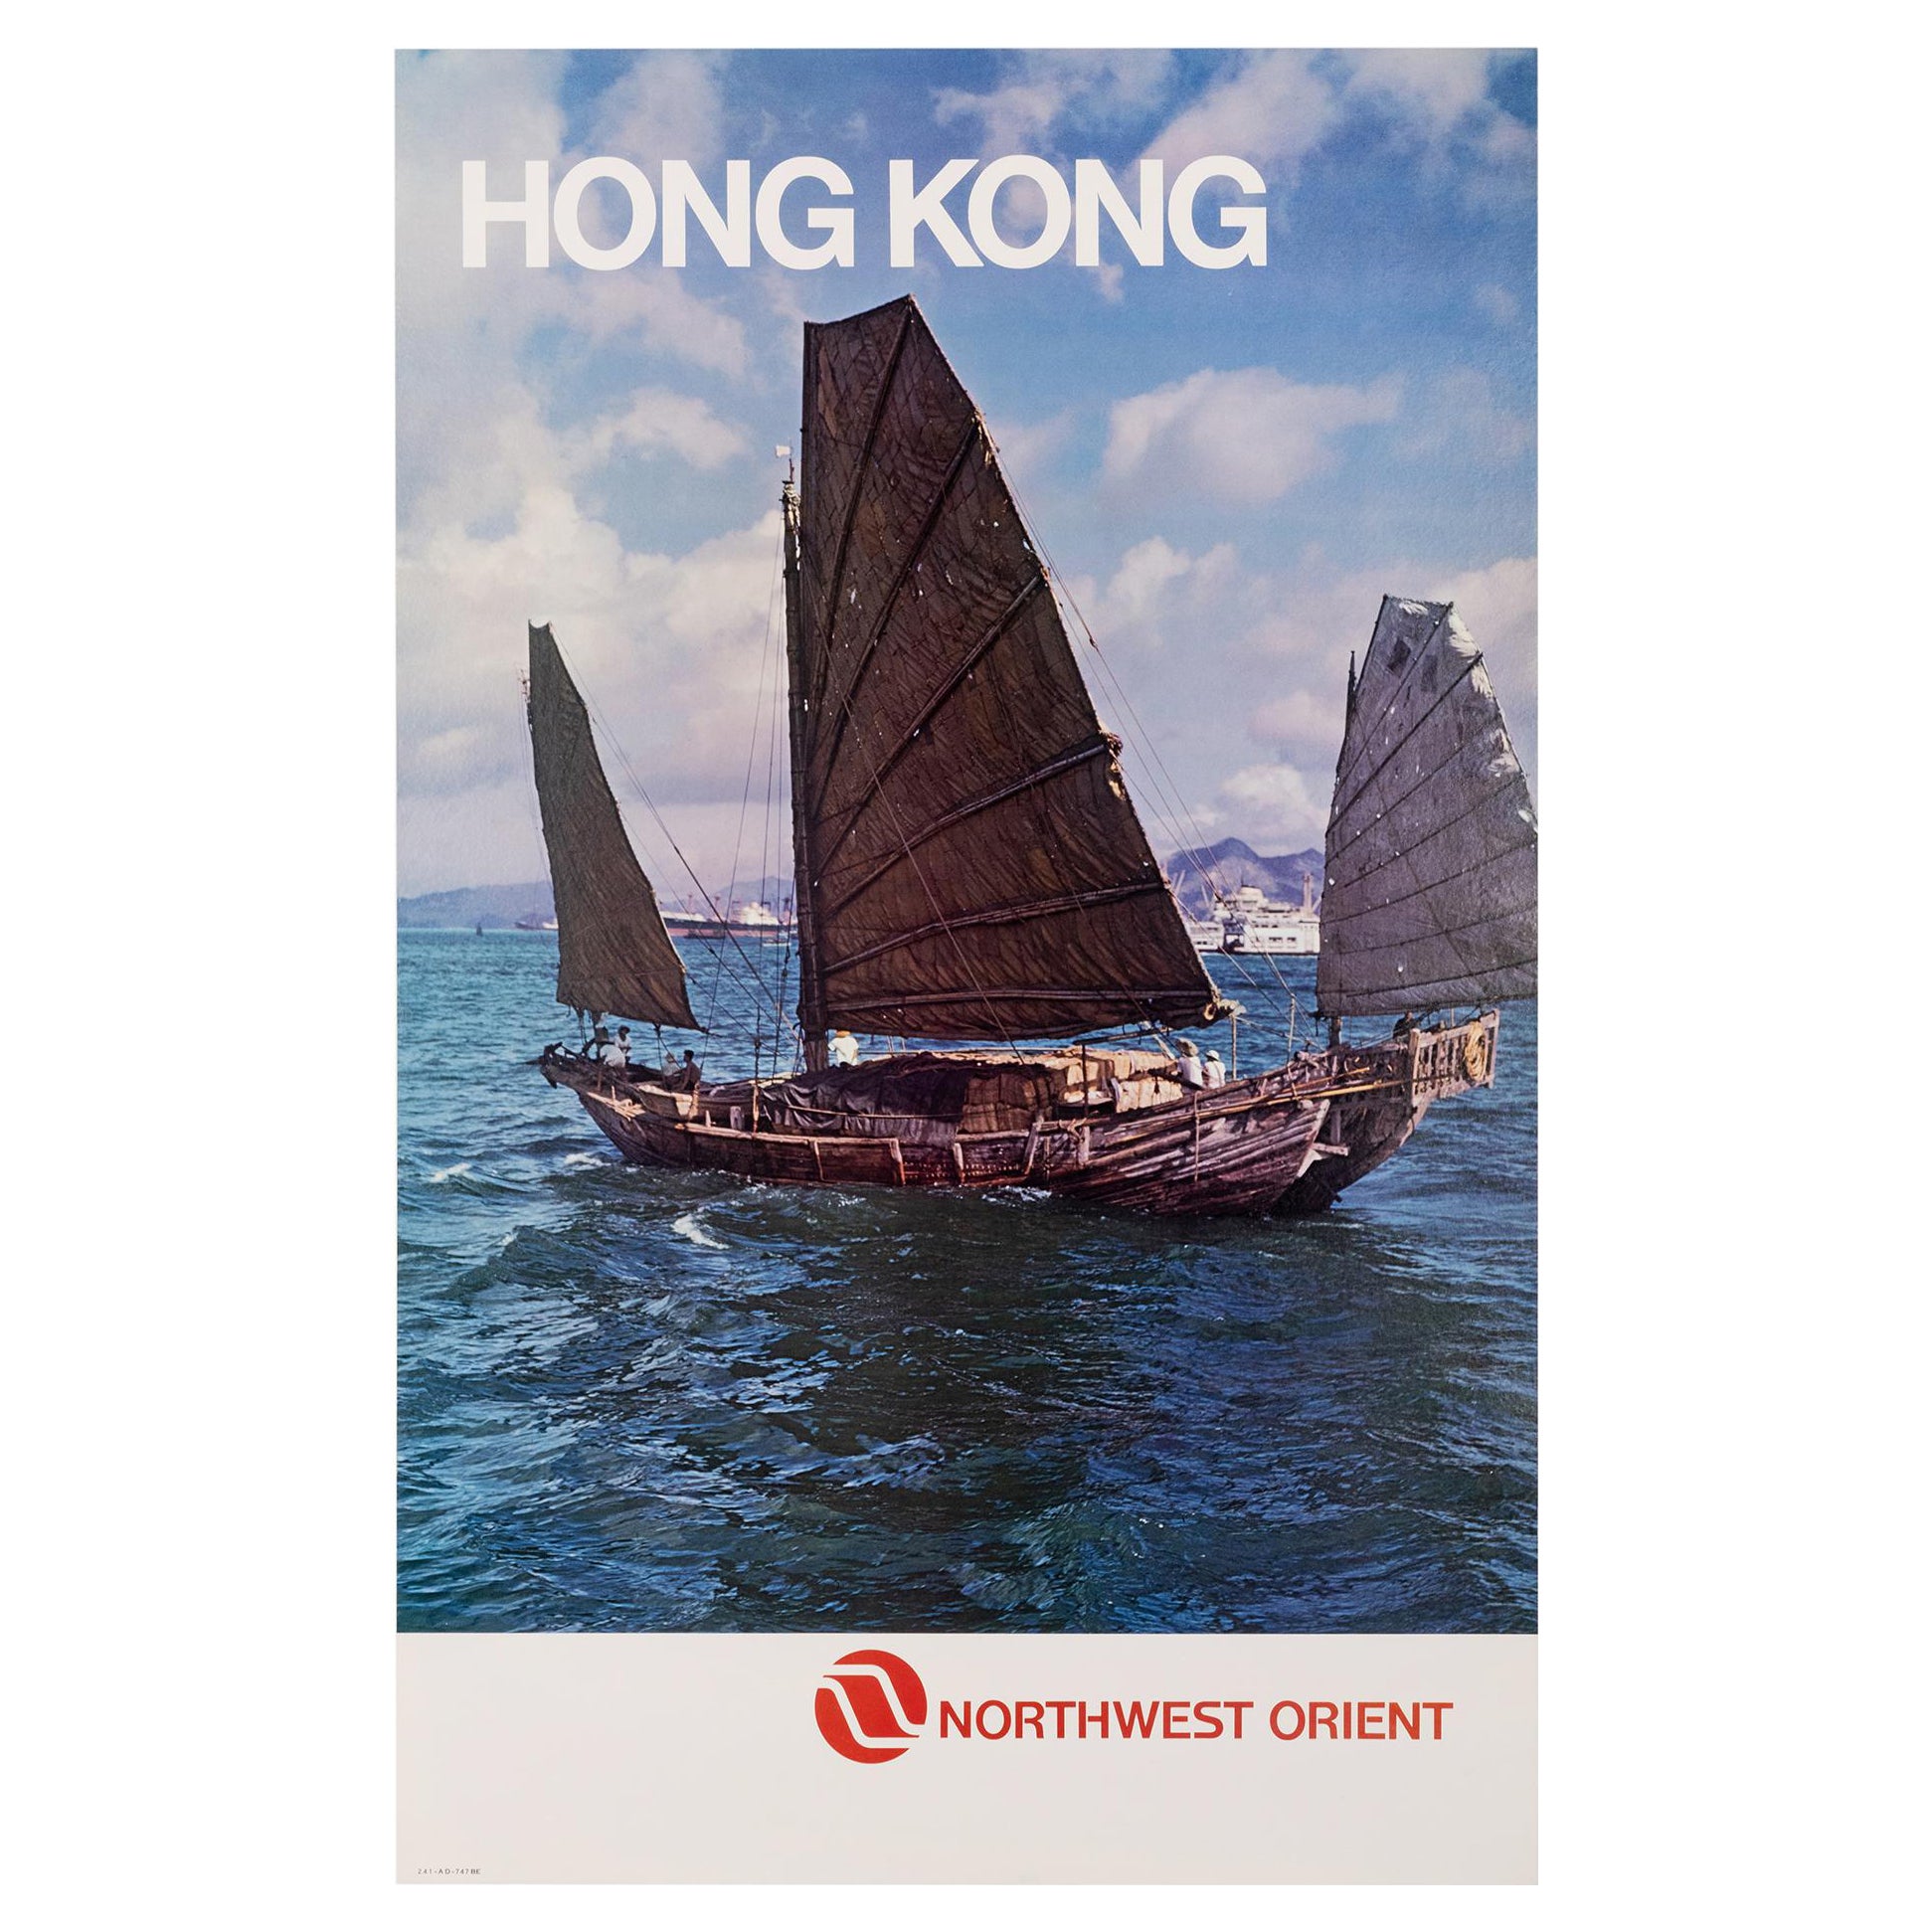 Northwest Orient Airlines / Hong Kong, 1960s. Vintage Airline Tourism Poster